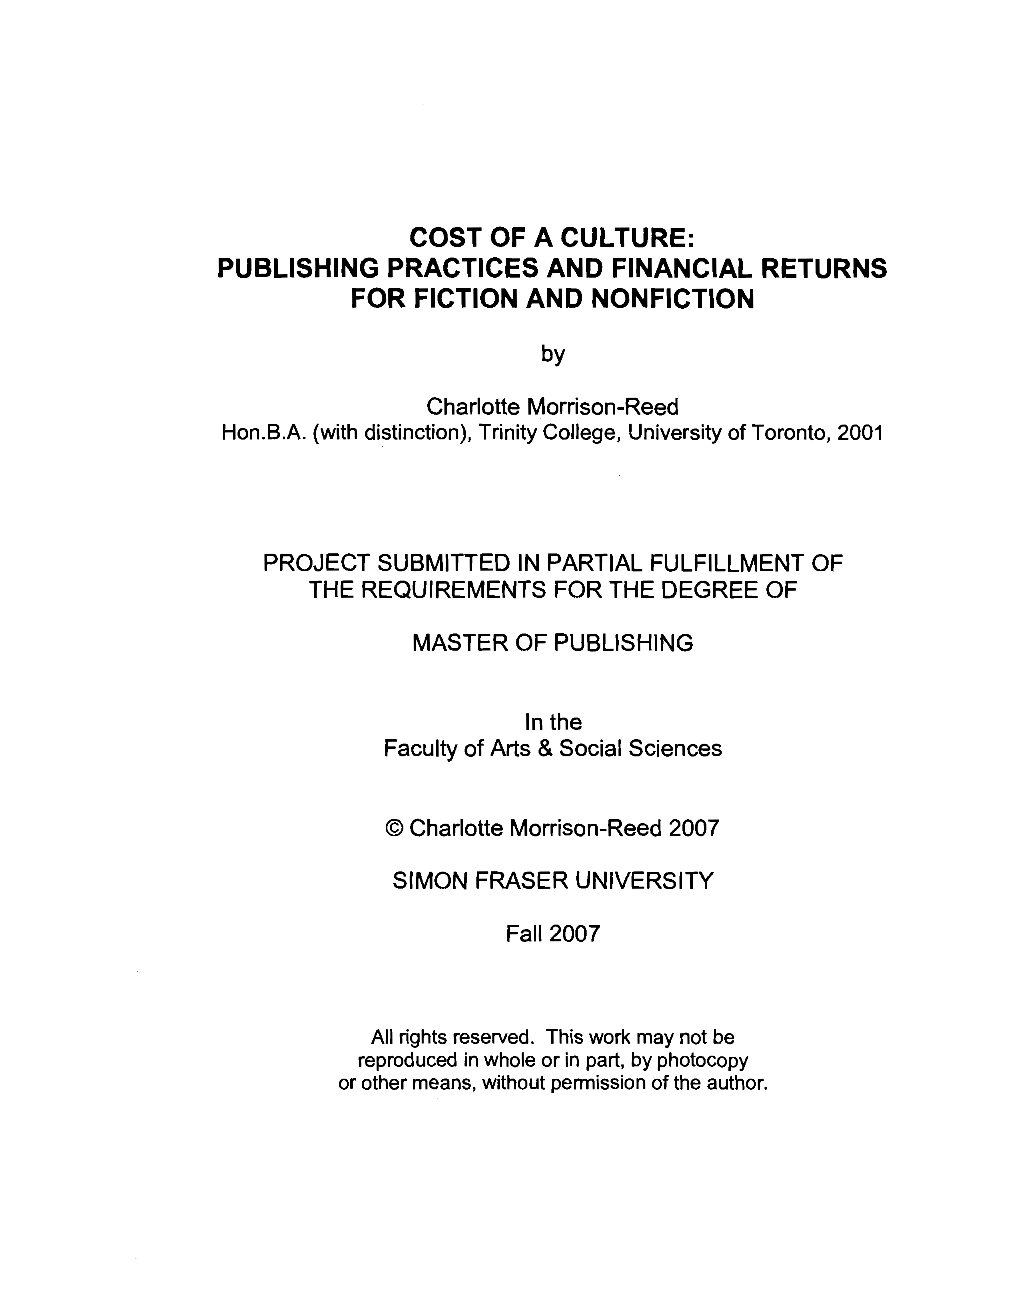 Publishing Practices and Financial Returns for Fiction and Nonfiction